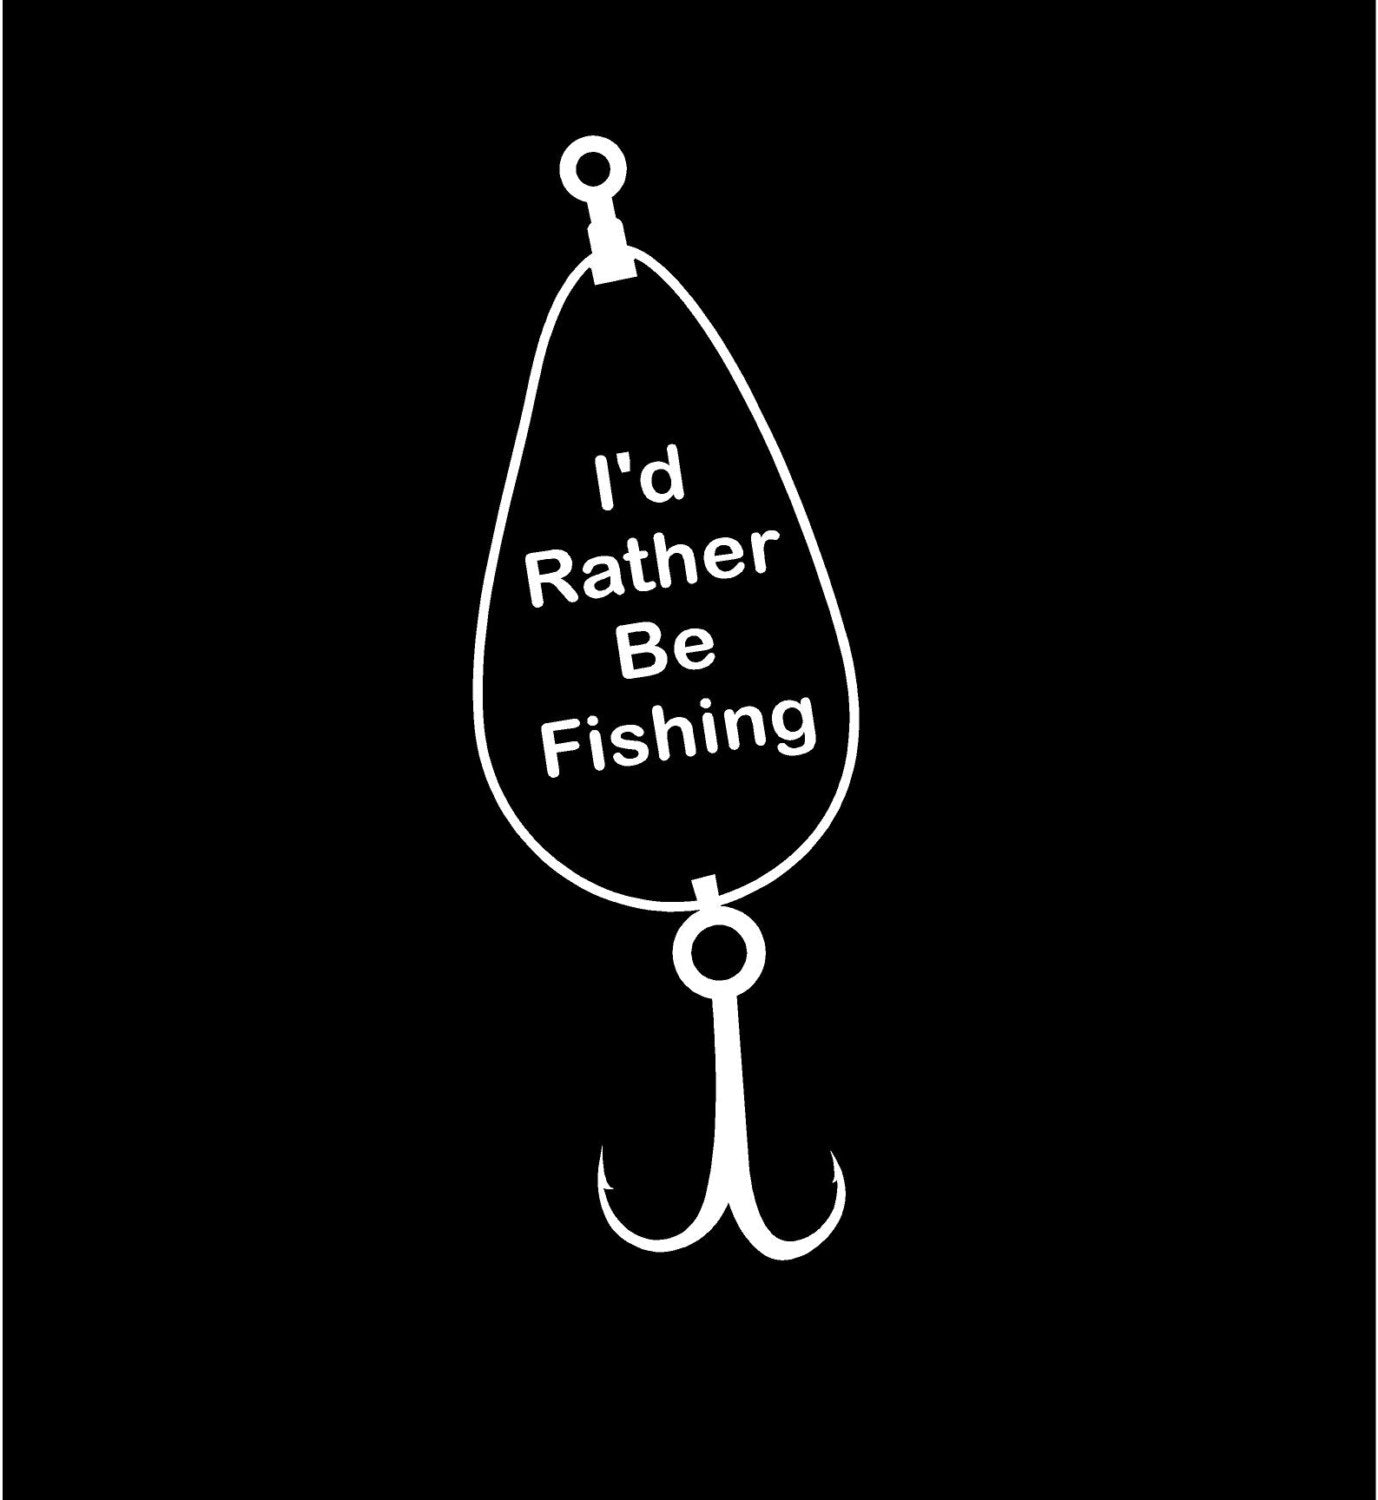 https://decalshut.ca/cdn/shop/products/Fishing_Lure_I_d_Rather_Be_Fishing_decal_car_decal_vinyl_decal_Car_Auto_Vehicle_Window_decal_Sticker_Fishing_Lure_Decal.jpg?v=1579144966